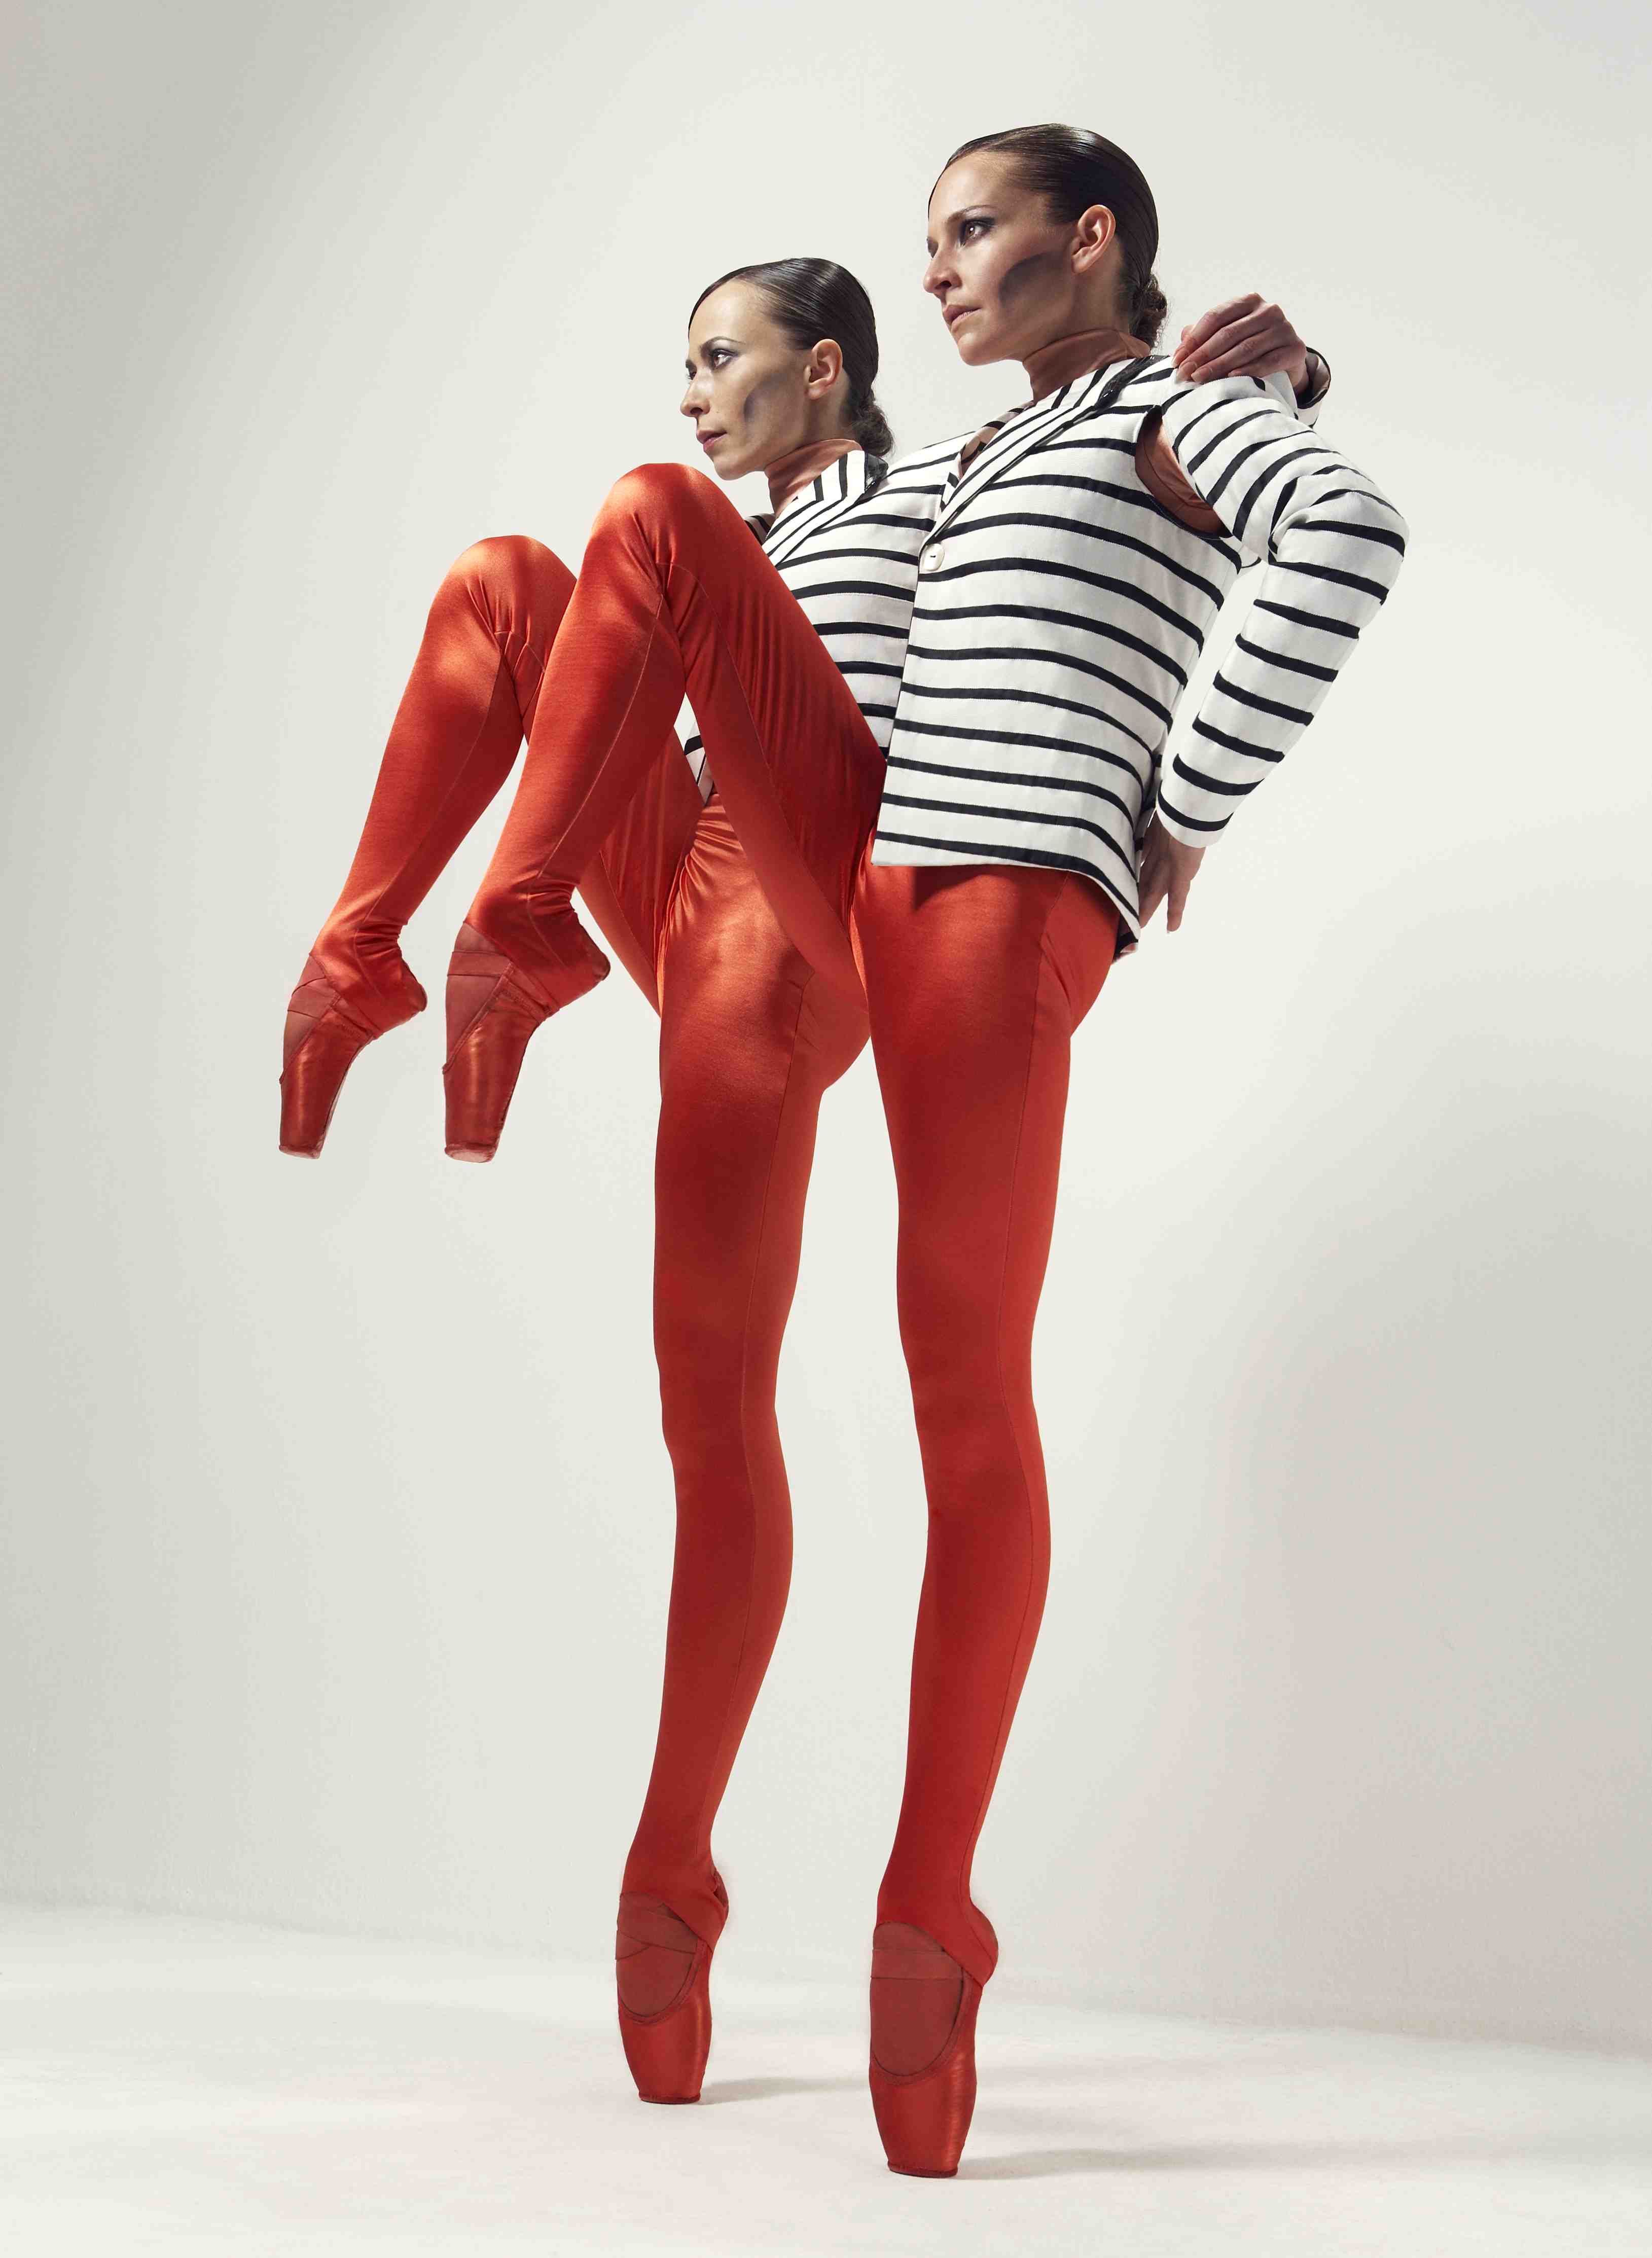 Oxana Panchenko & Clair Thomas by Jake Walters low res.jpg